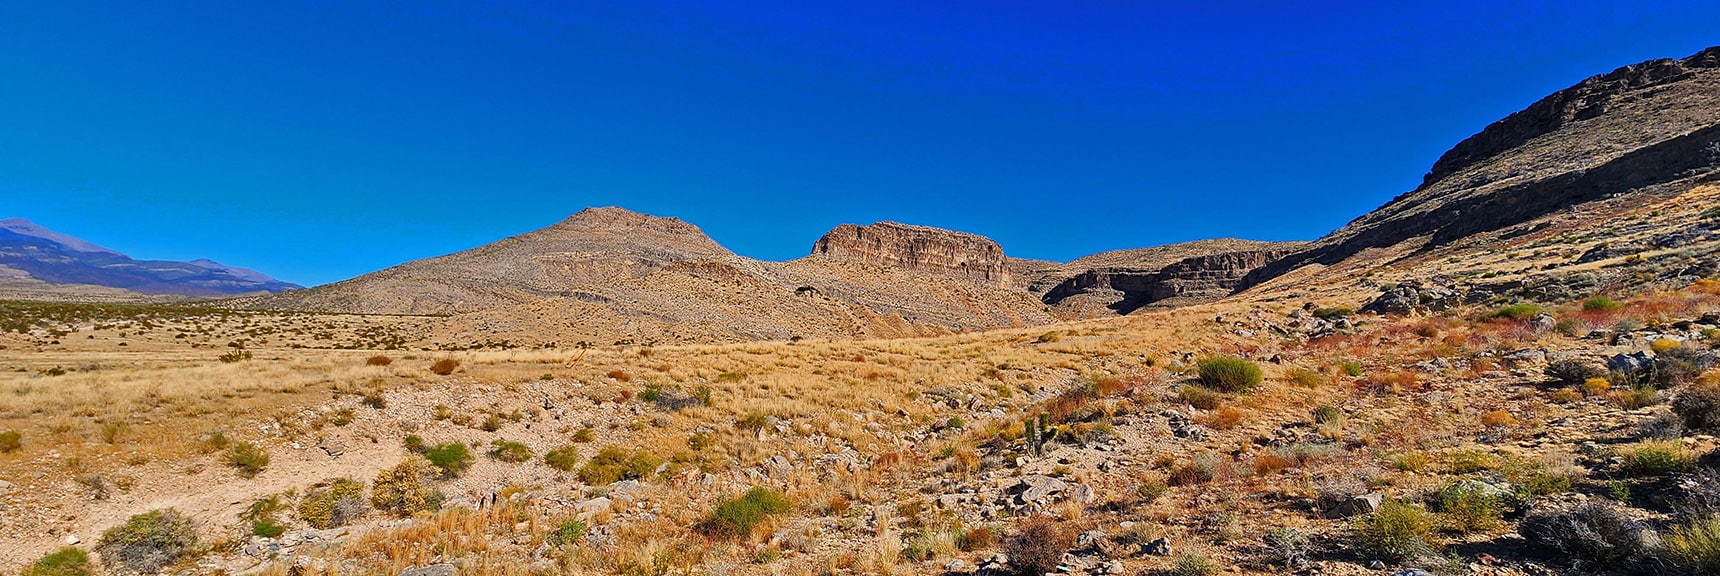 Entering the Southern Canyon. Note the Many Vertical Ledges. | Landmark Bluff | Lovell Canyon, Nevada